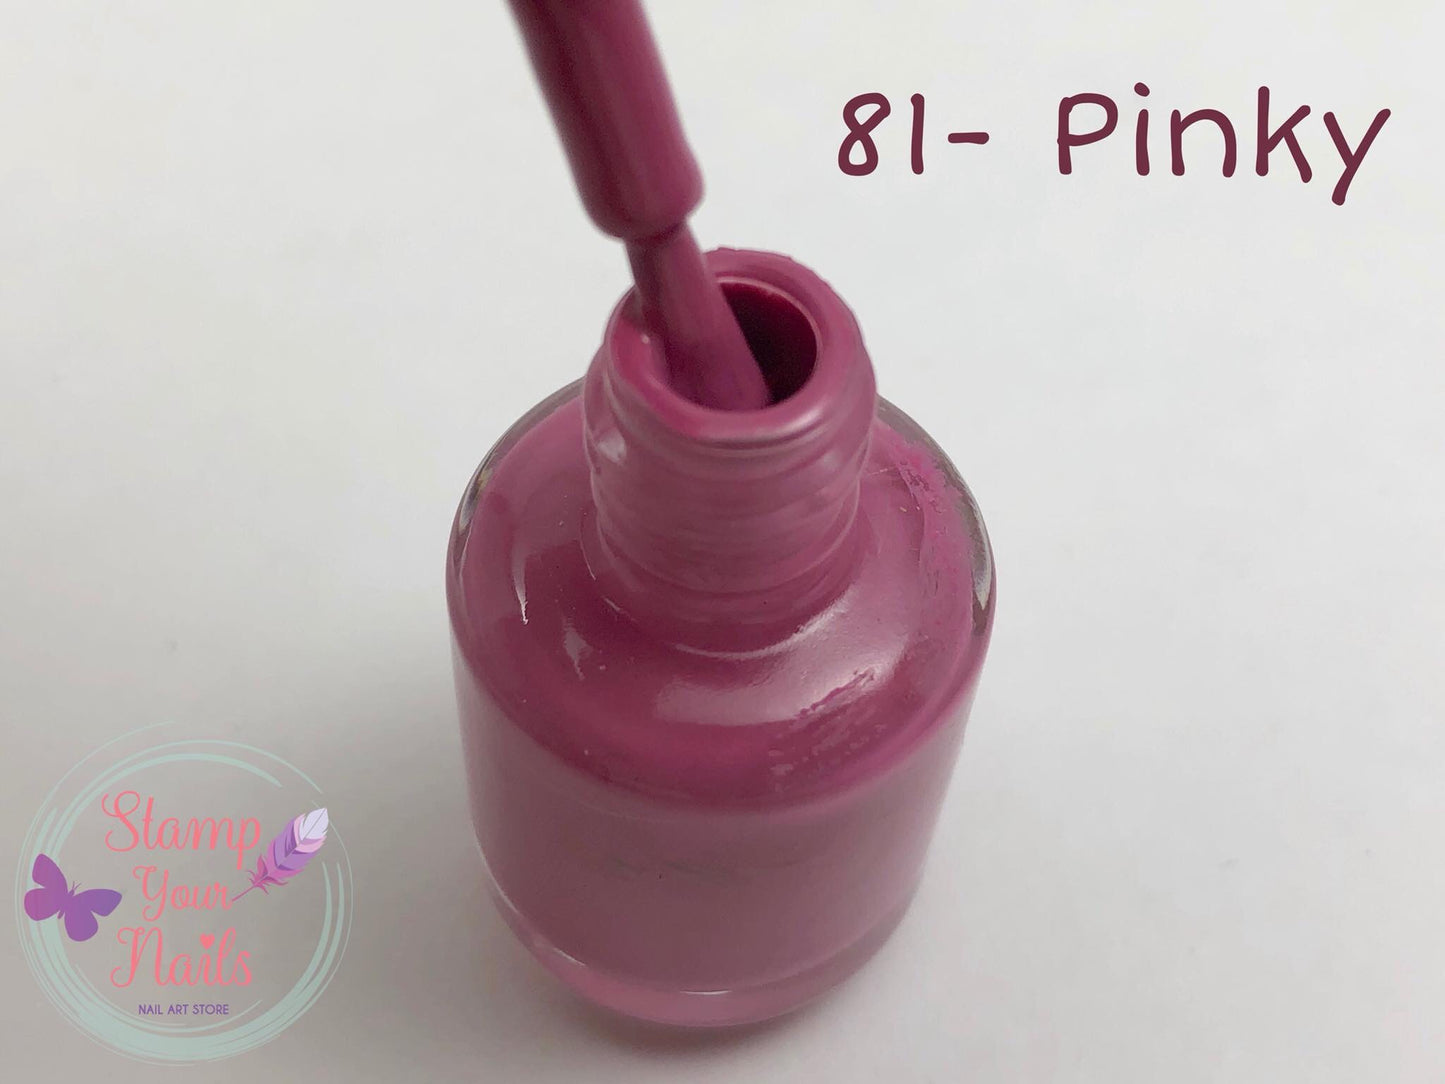 81 Pinky - Stamp your nails